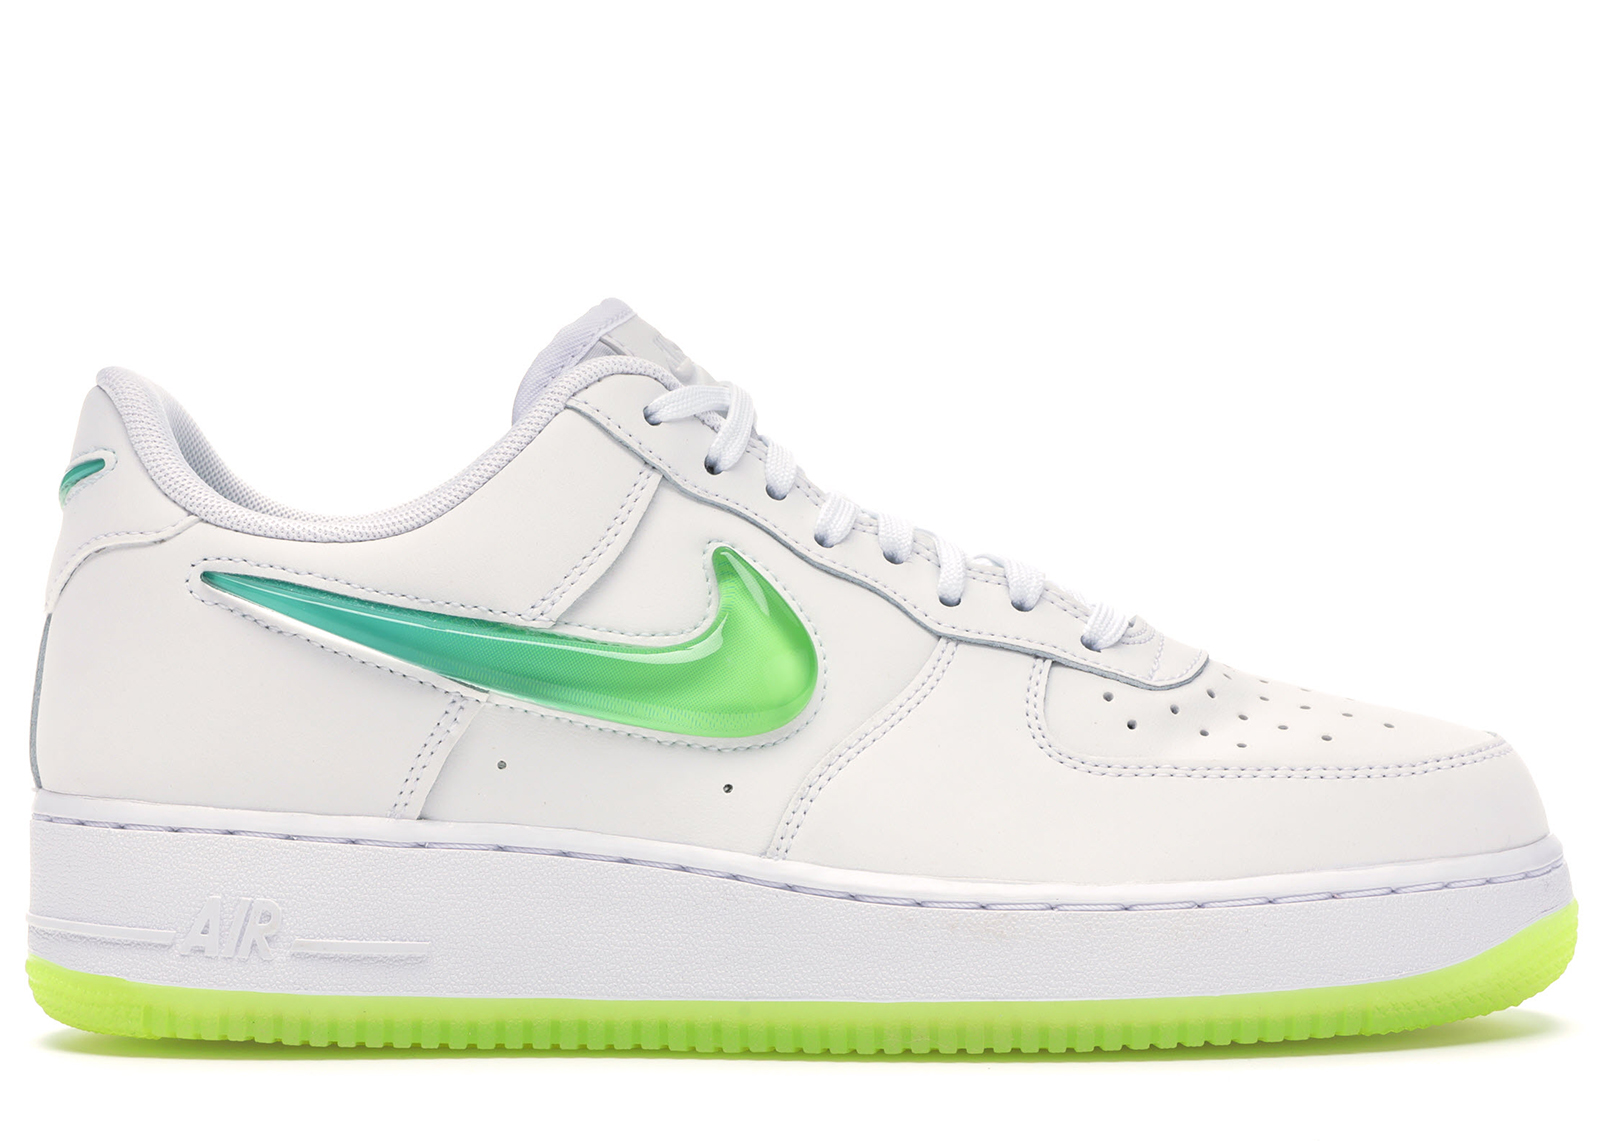 nike air force 1 low lime green